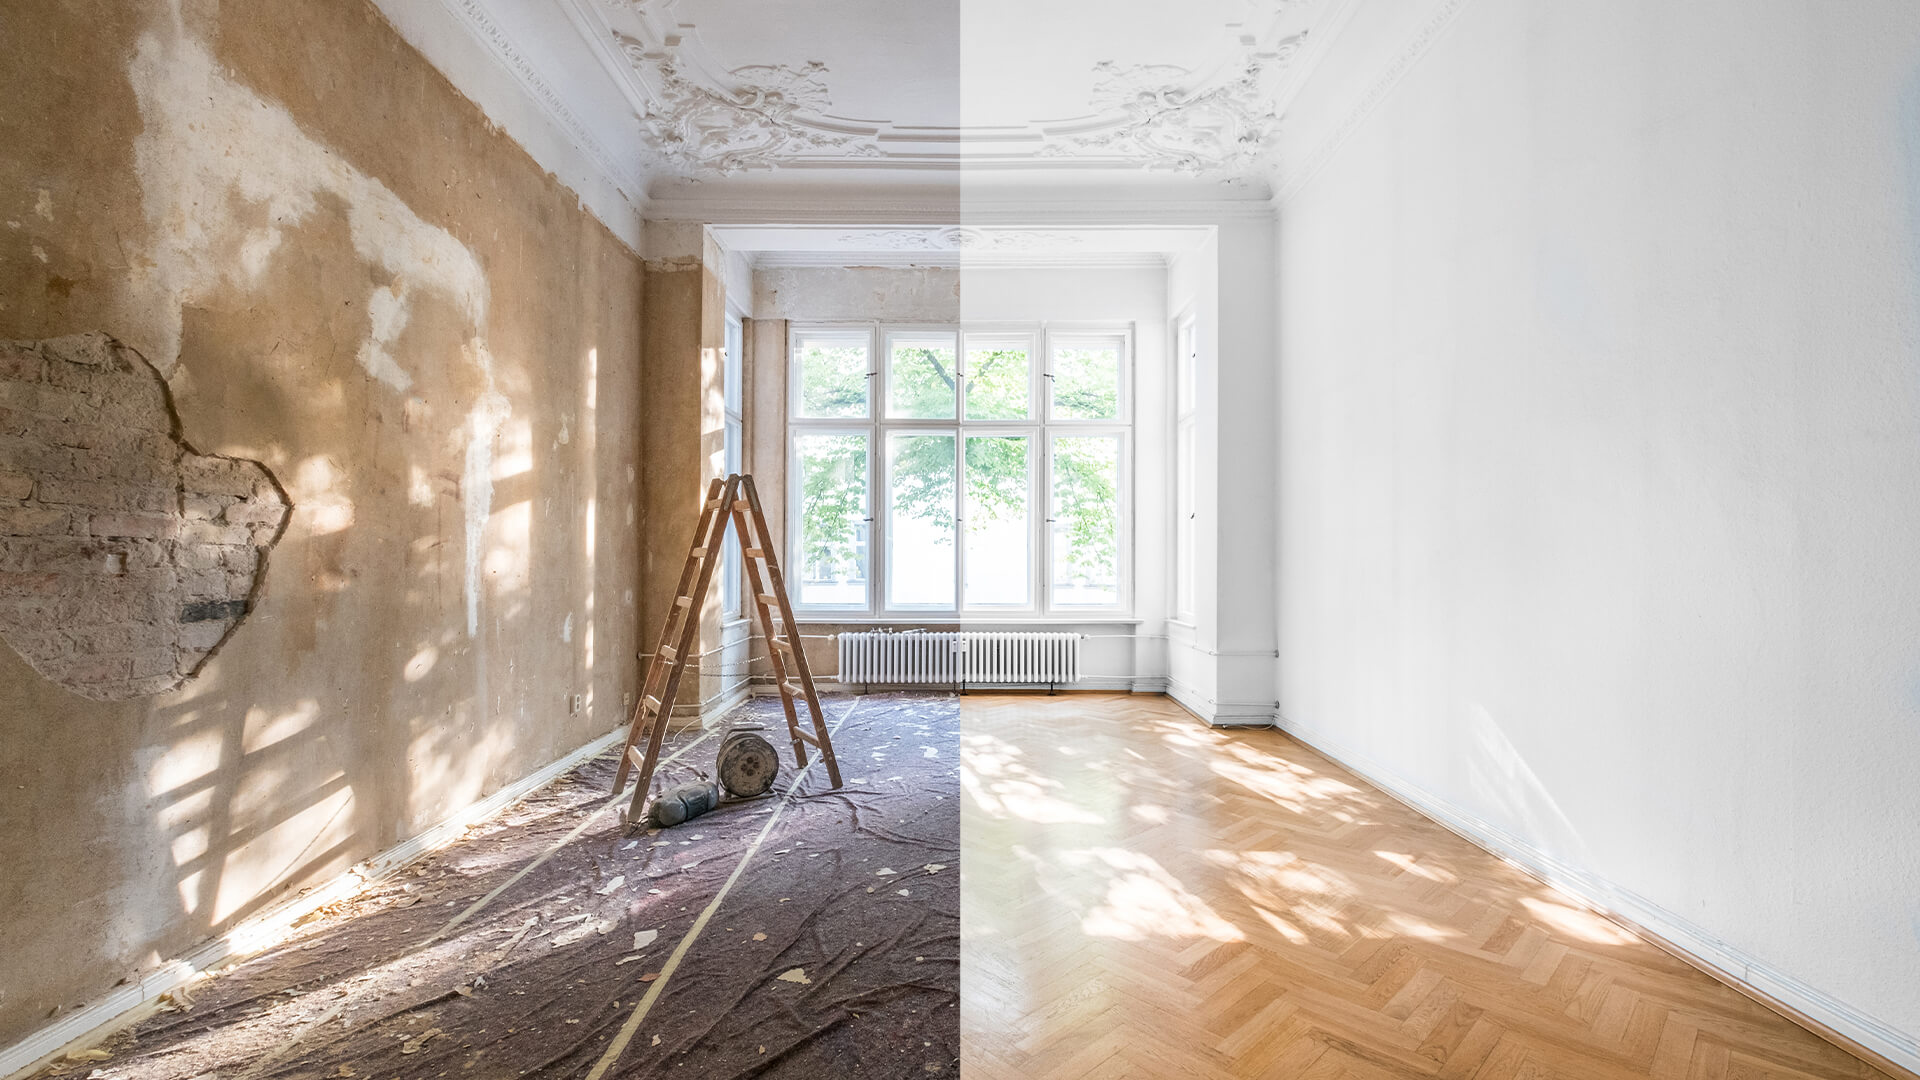 Top Five Common Issues When Remodeling an Old Home